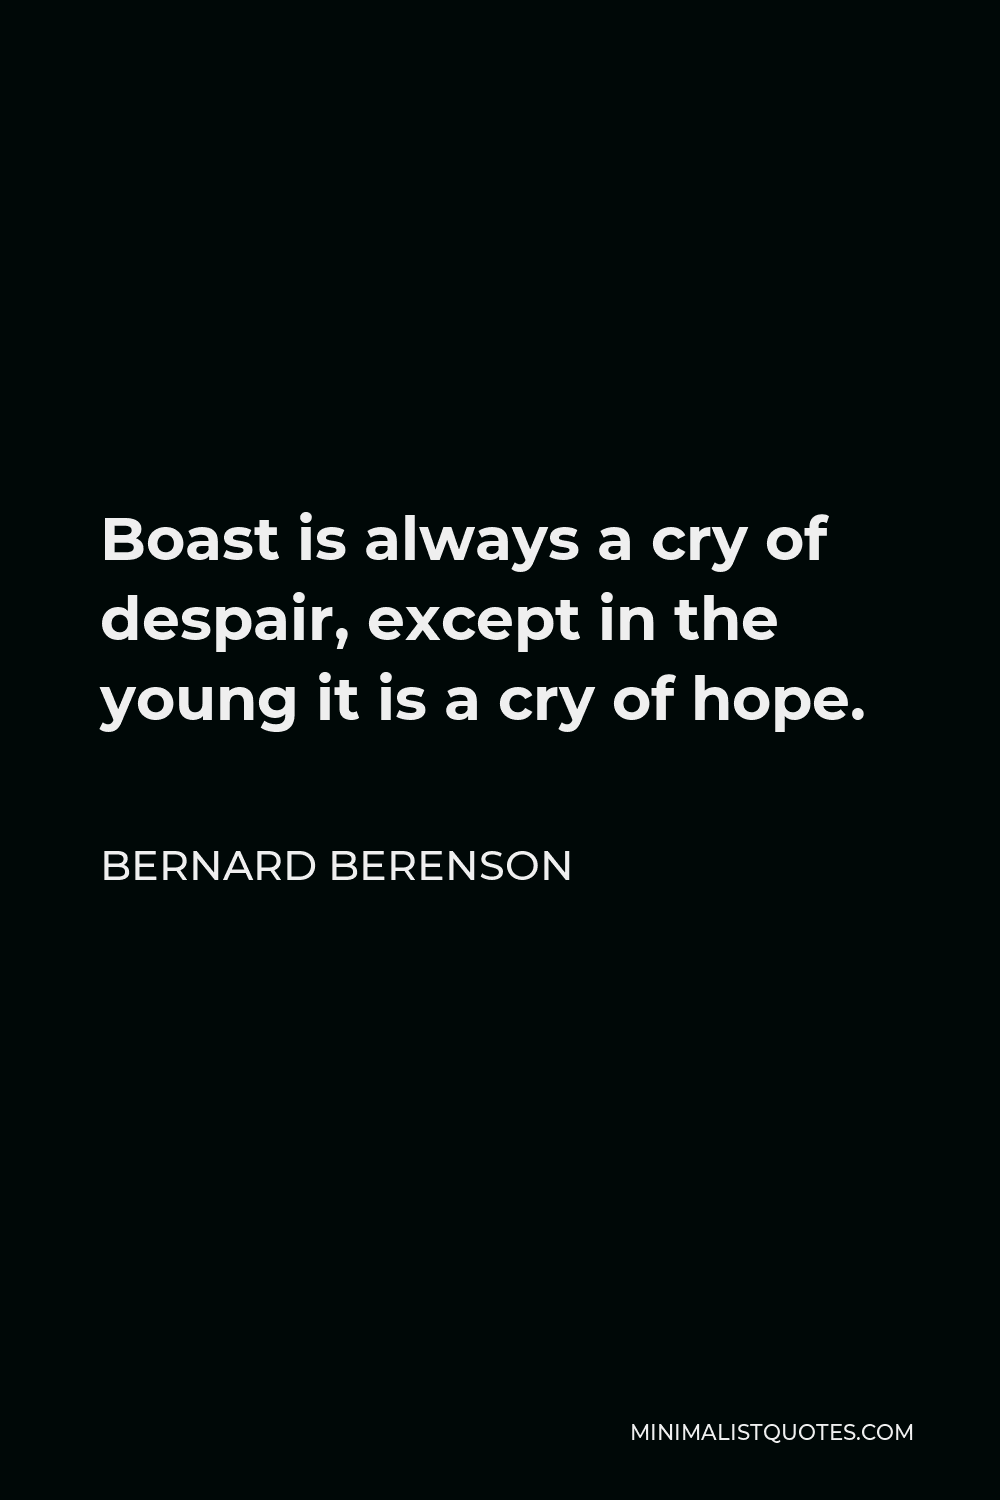 Bernard Berenson Quote - Boast is always a cry of despair, except in the young it is a cry of hope.